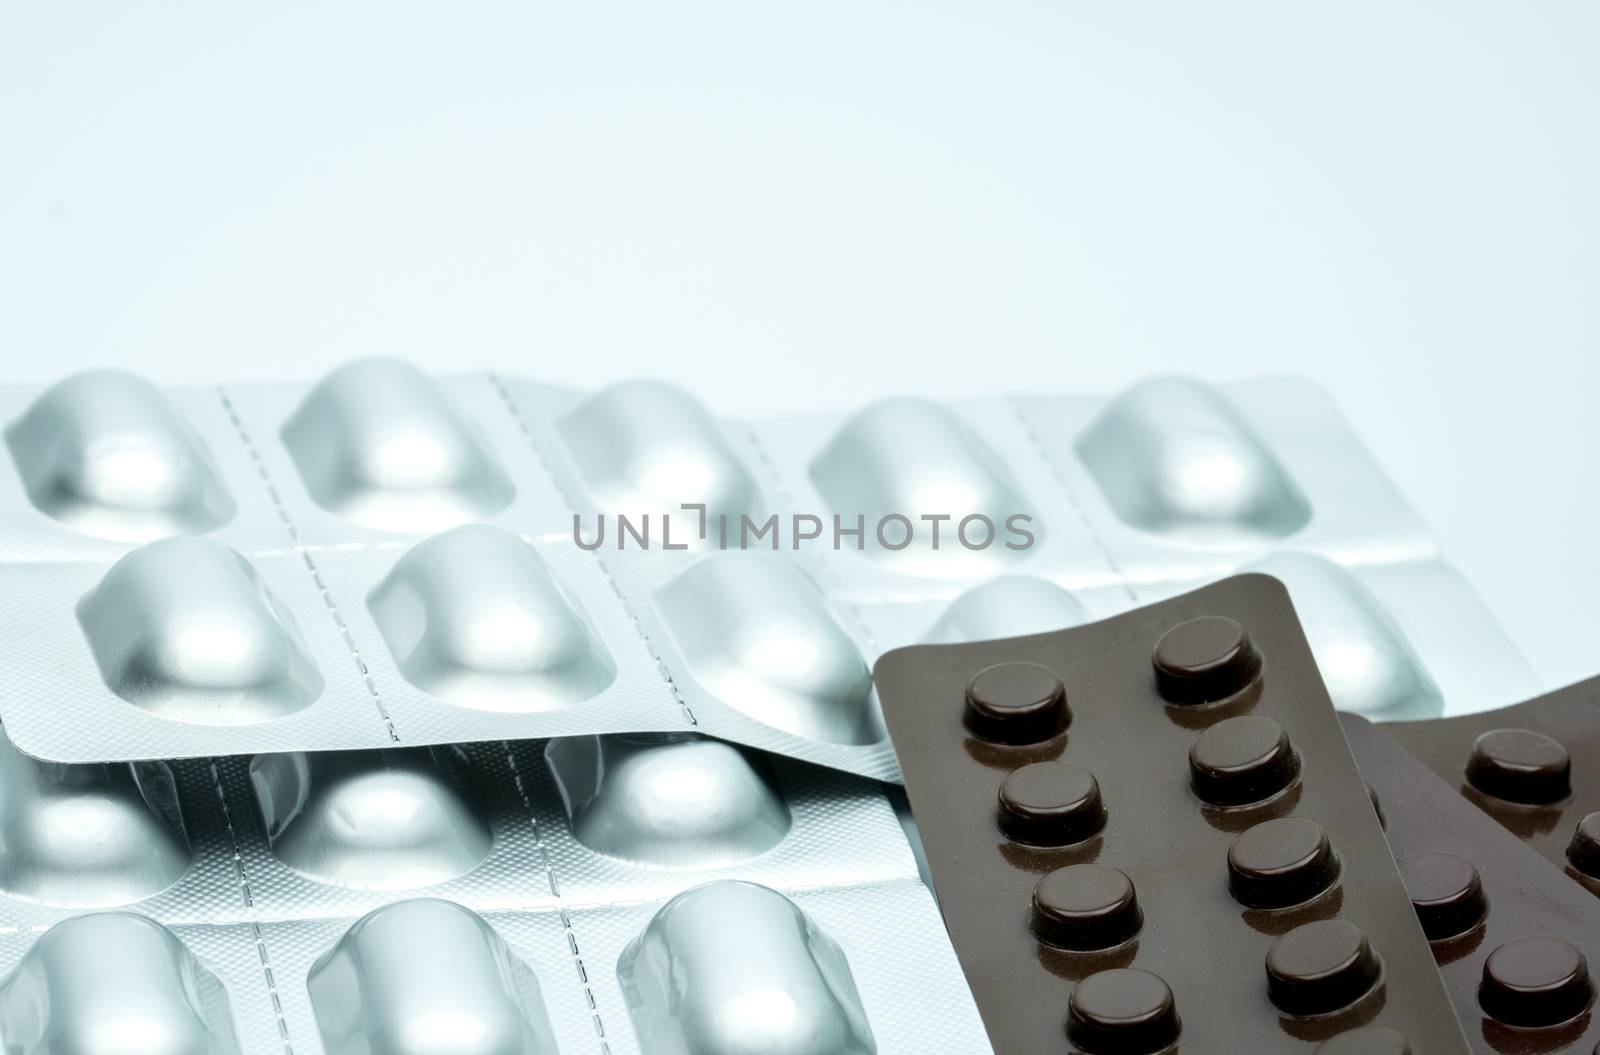 Silver aluminium blister pack and brown blister pack for light resistance packaging to protect drug degradation. Tablet pills packaging isolated on white background. Pharmaceutical industry. Pharmacy background. Global healthcare. Health budgets and policy concept. by Fahroni